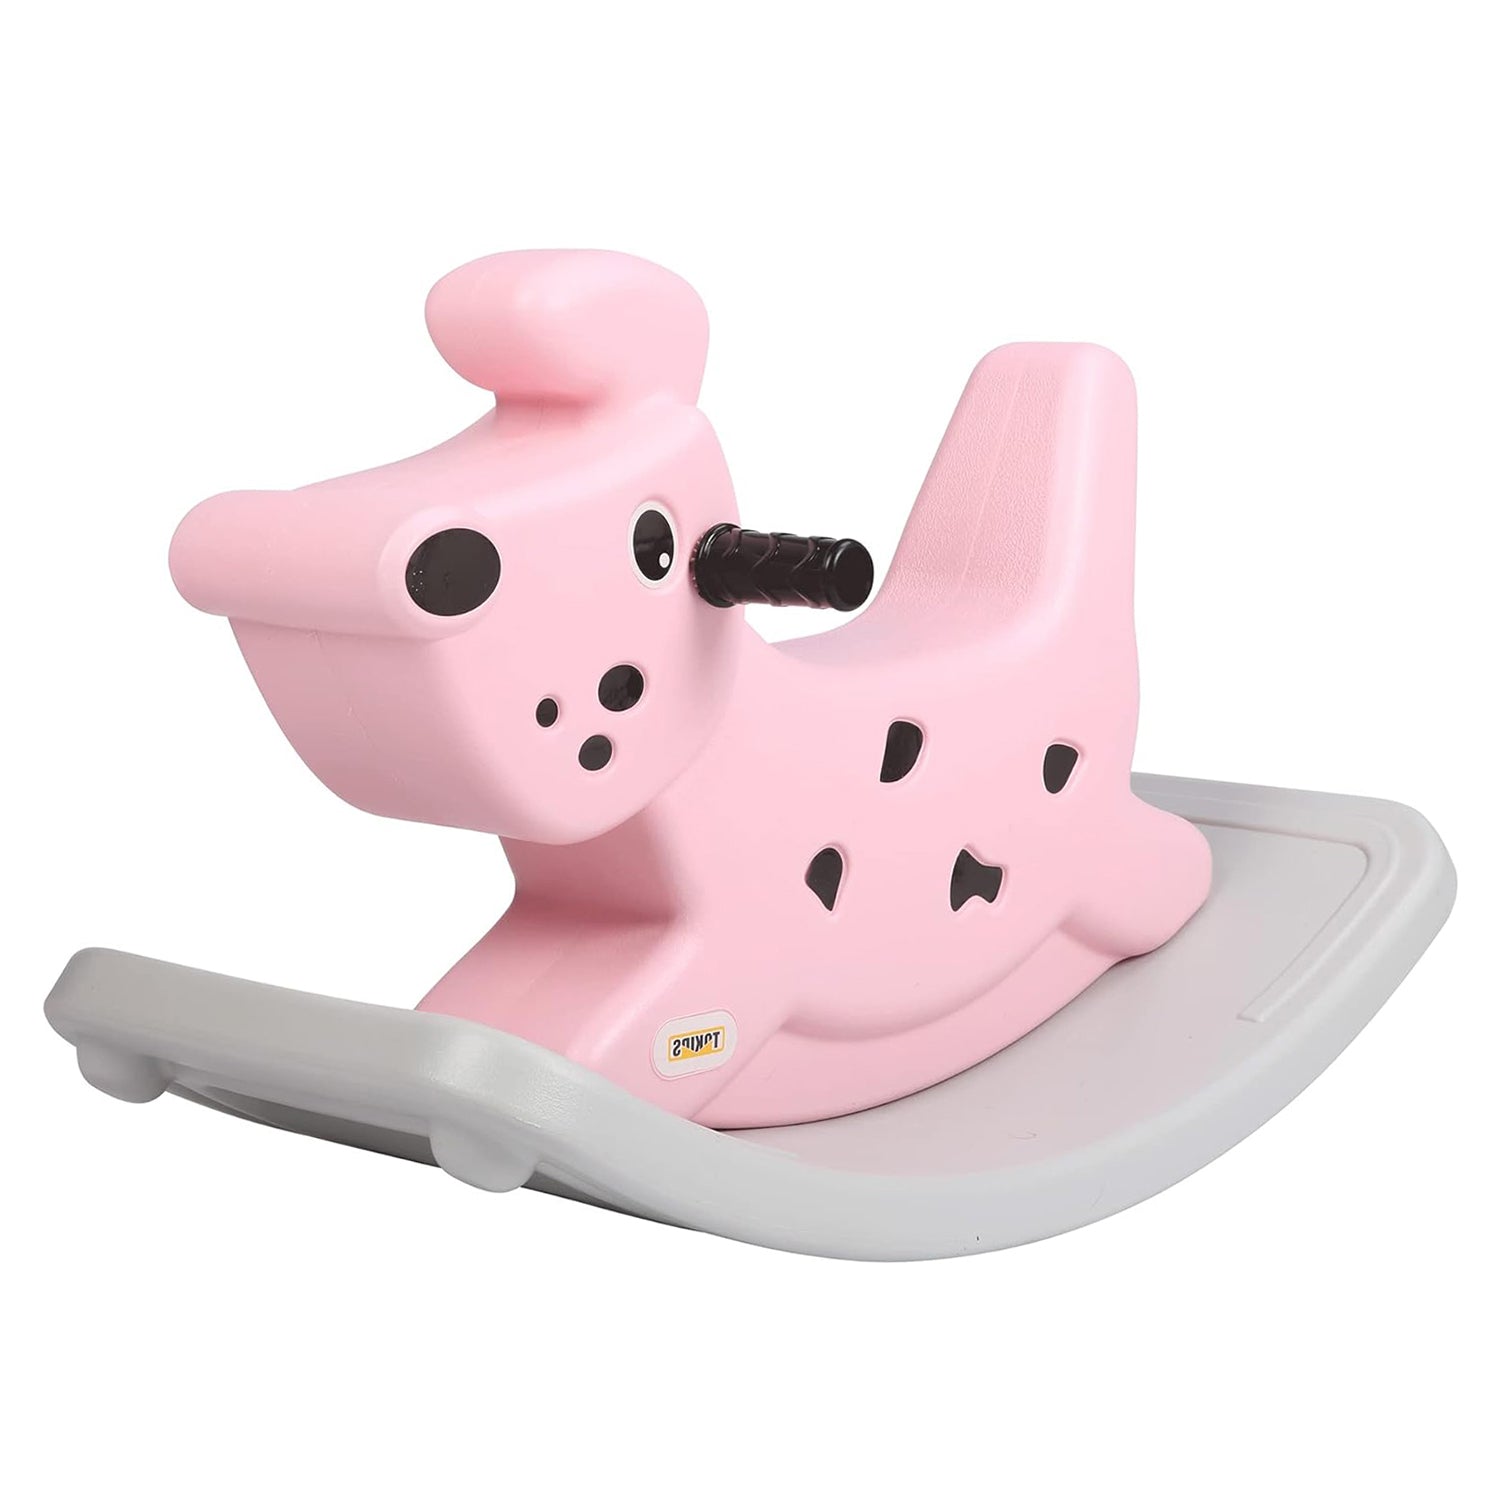 Kids Ride-on Toy Rocking Horse with Music for Toddlers 1-3 Years Old, Pink